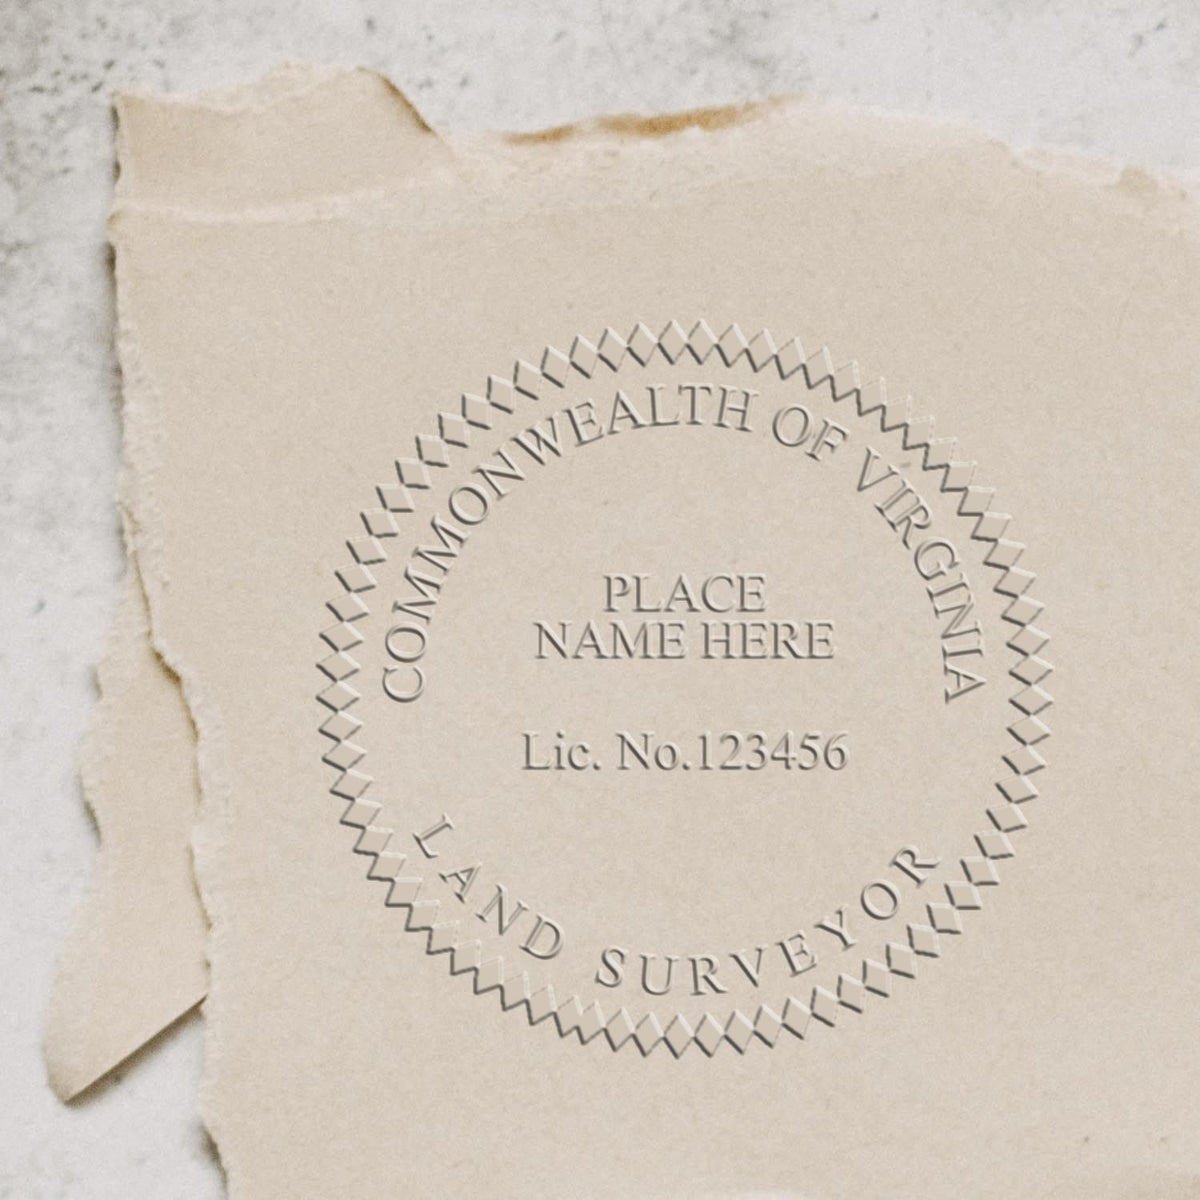 A photograph of the Hybrid Virginia Land Surveyor Seal stamp impression reveals a vivid, professional image of the on paper.